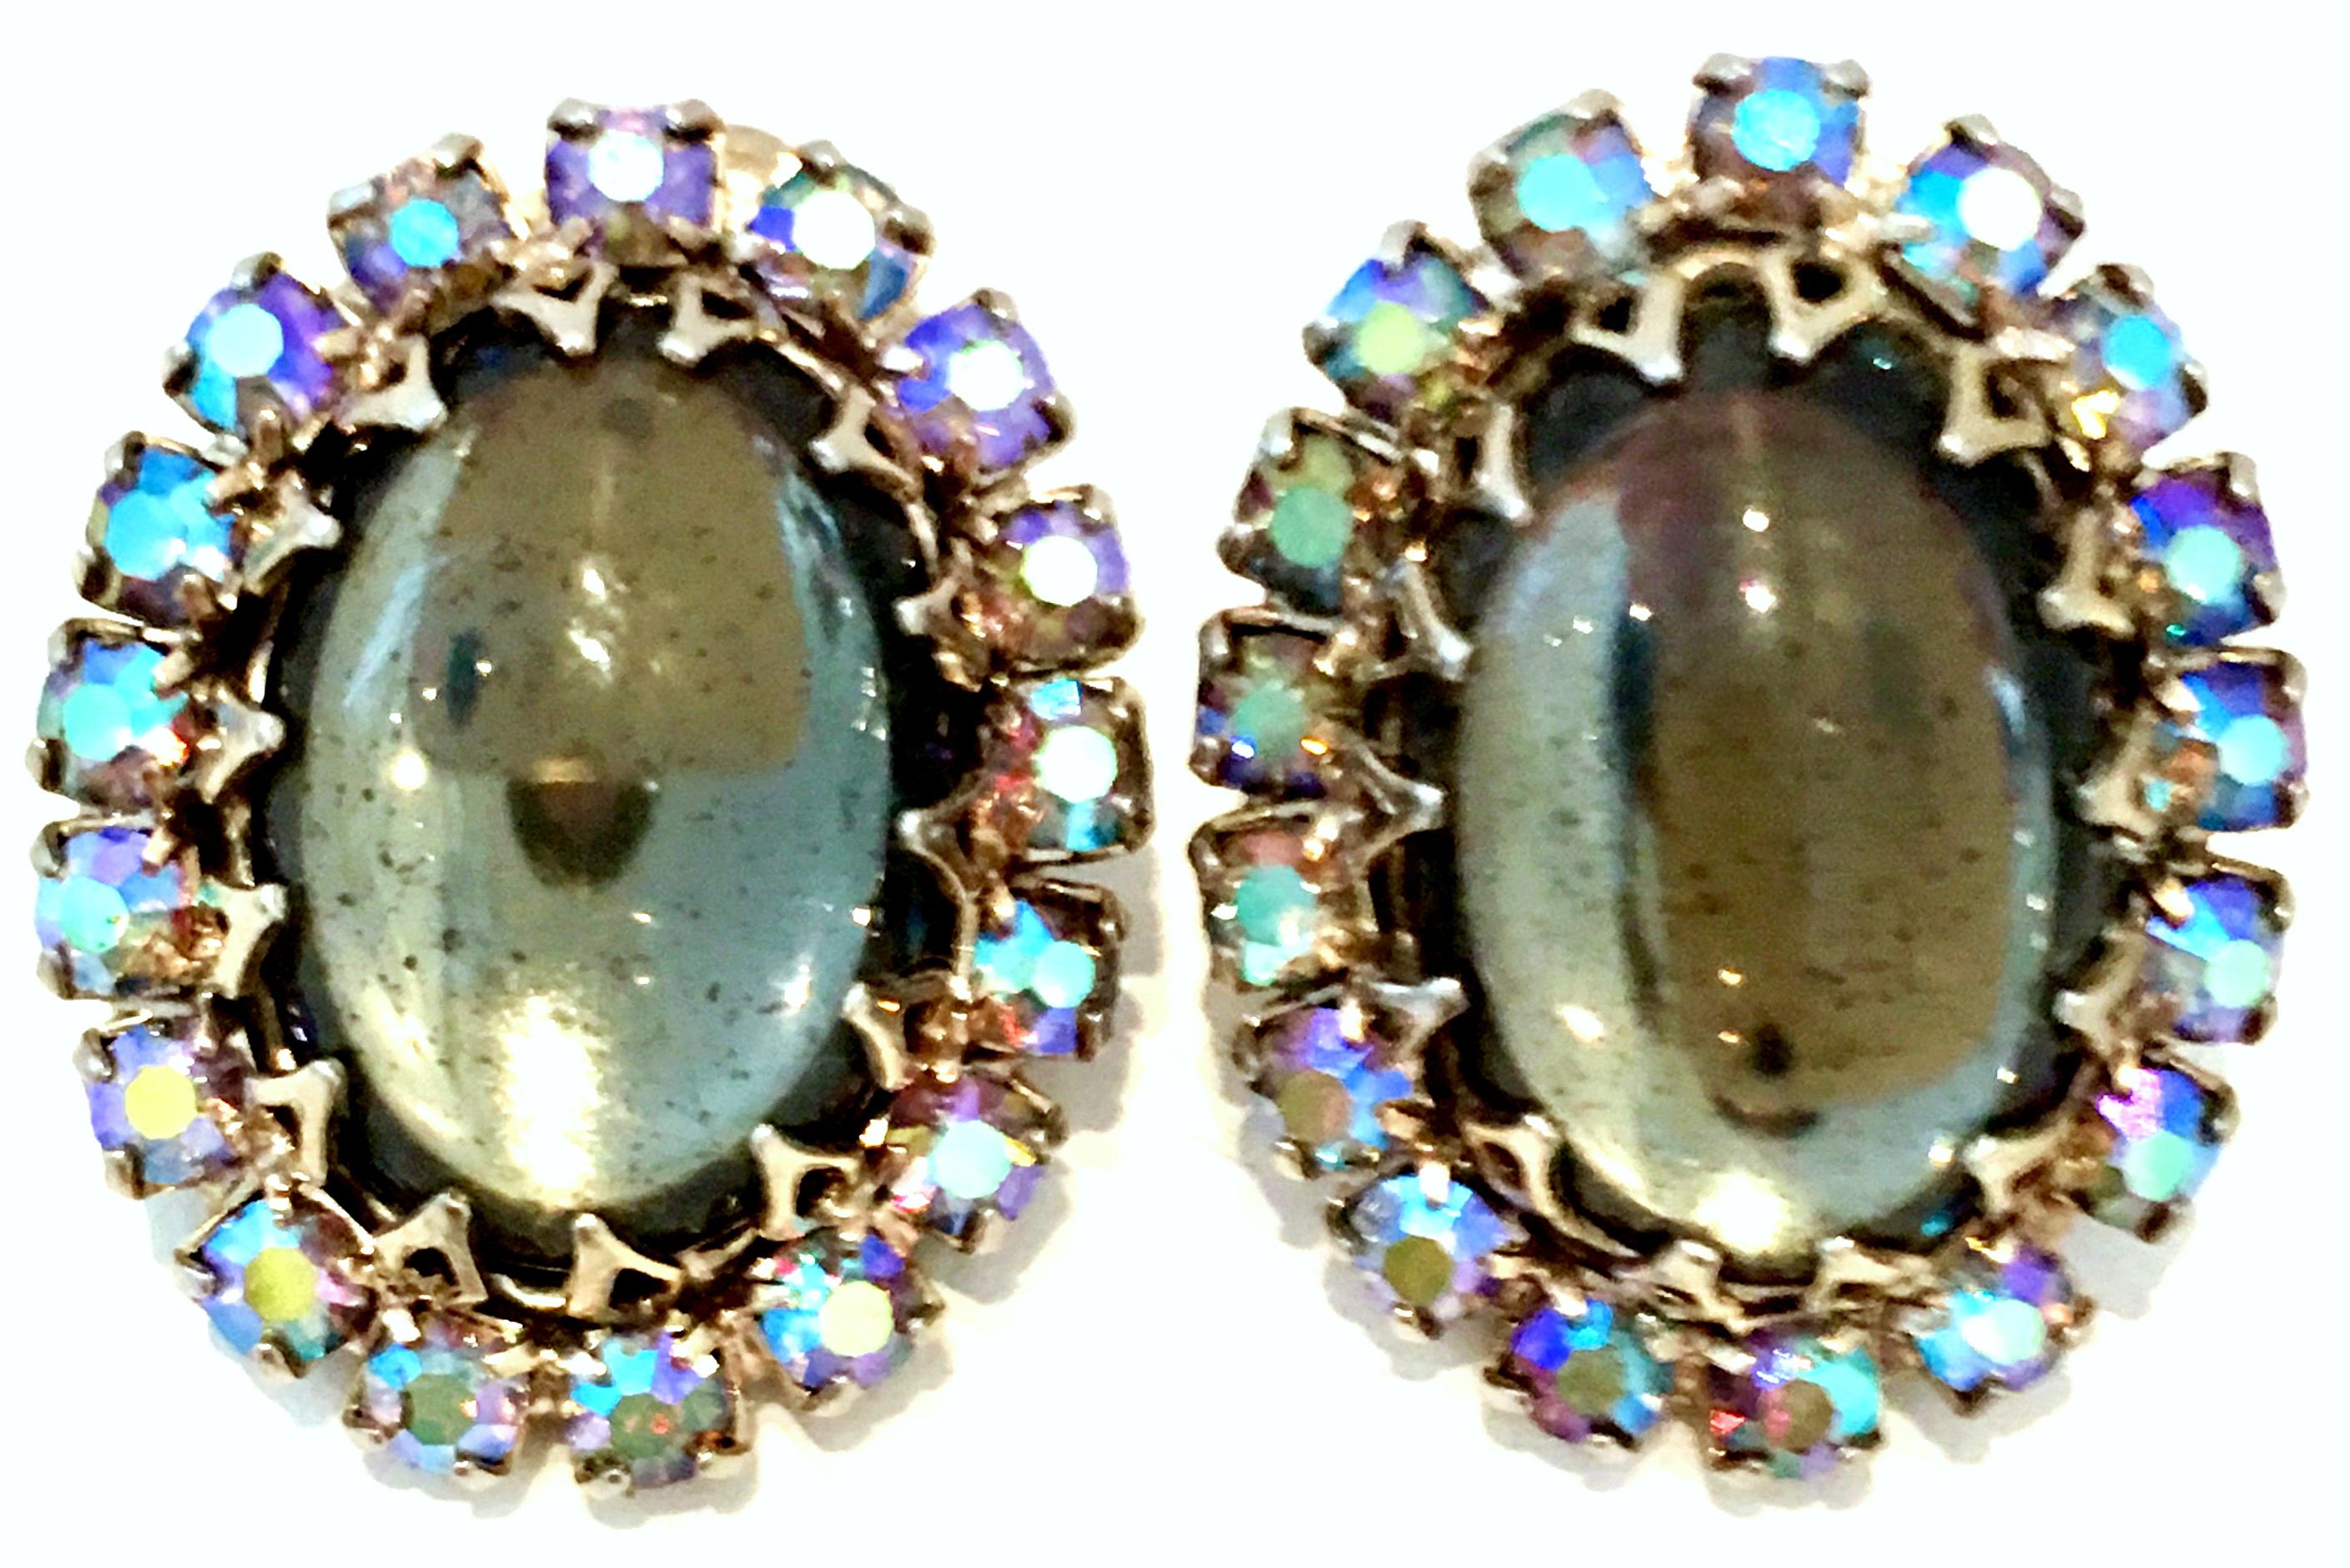 Mid-20th Century Sterling Silver, Art Glass & Austrian Crystal Earrings. These unique clip style earrings feature a large central dome shape art glass moonstone surrounded by Aurora Borealis Austrian fancy prong set crystal.
